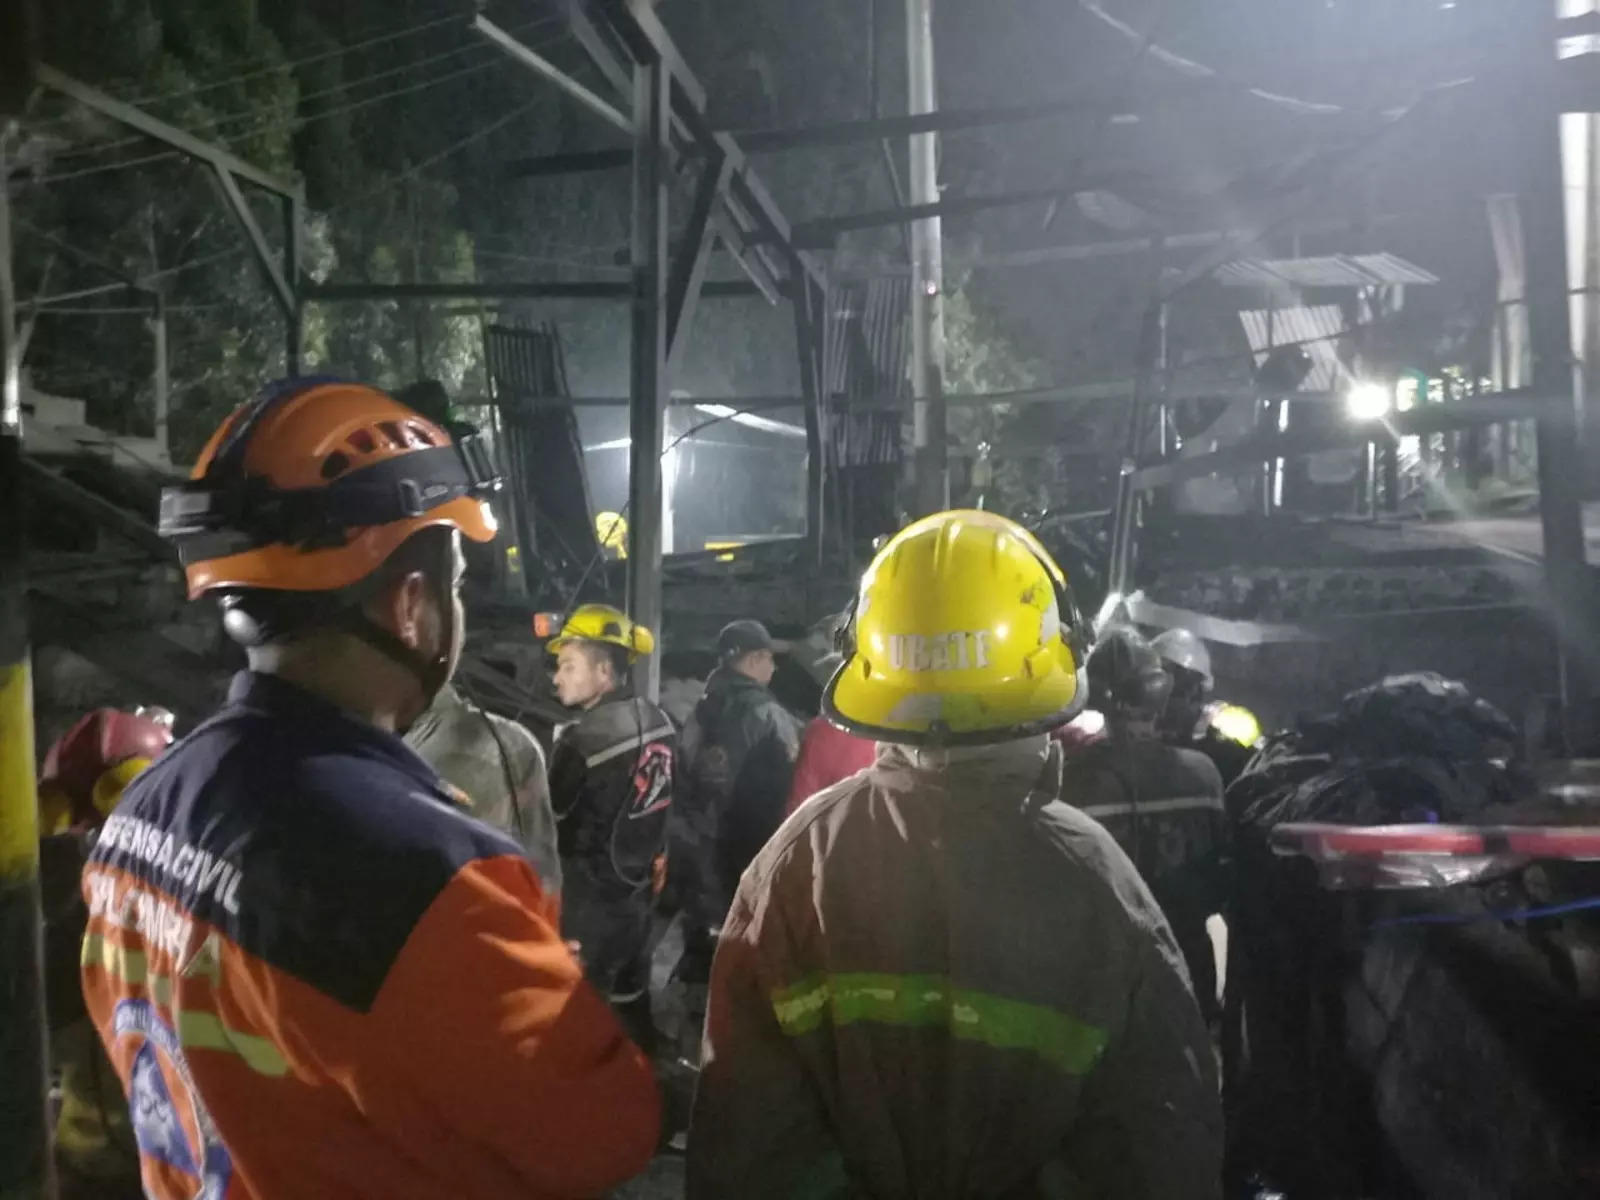 Officials say 21 workers killed at coal mine in Colombia